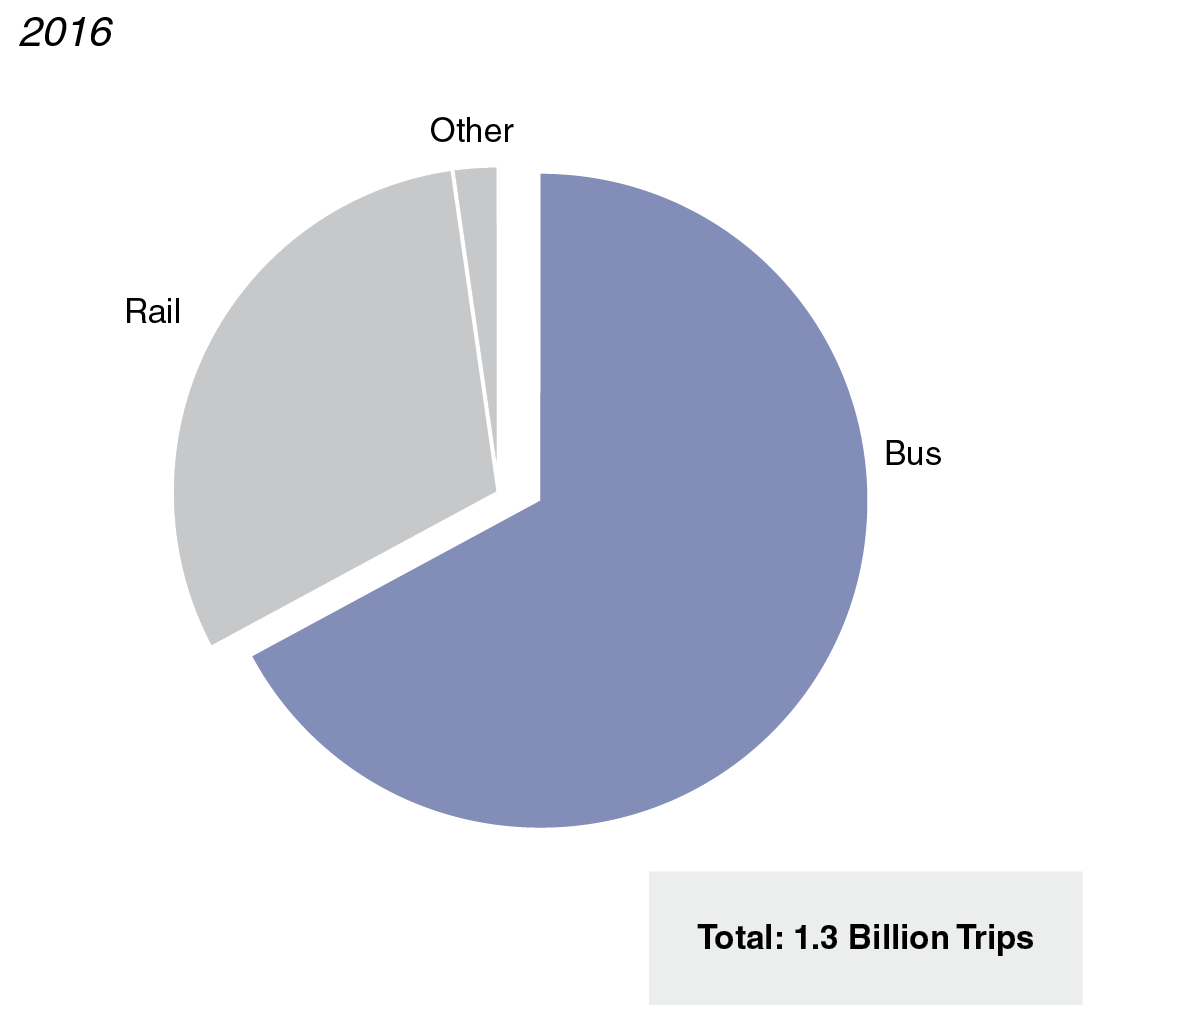 Figure: Most Transit Trips Occur on Buses